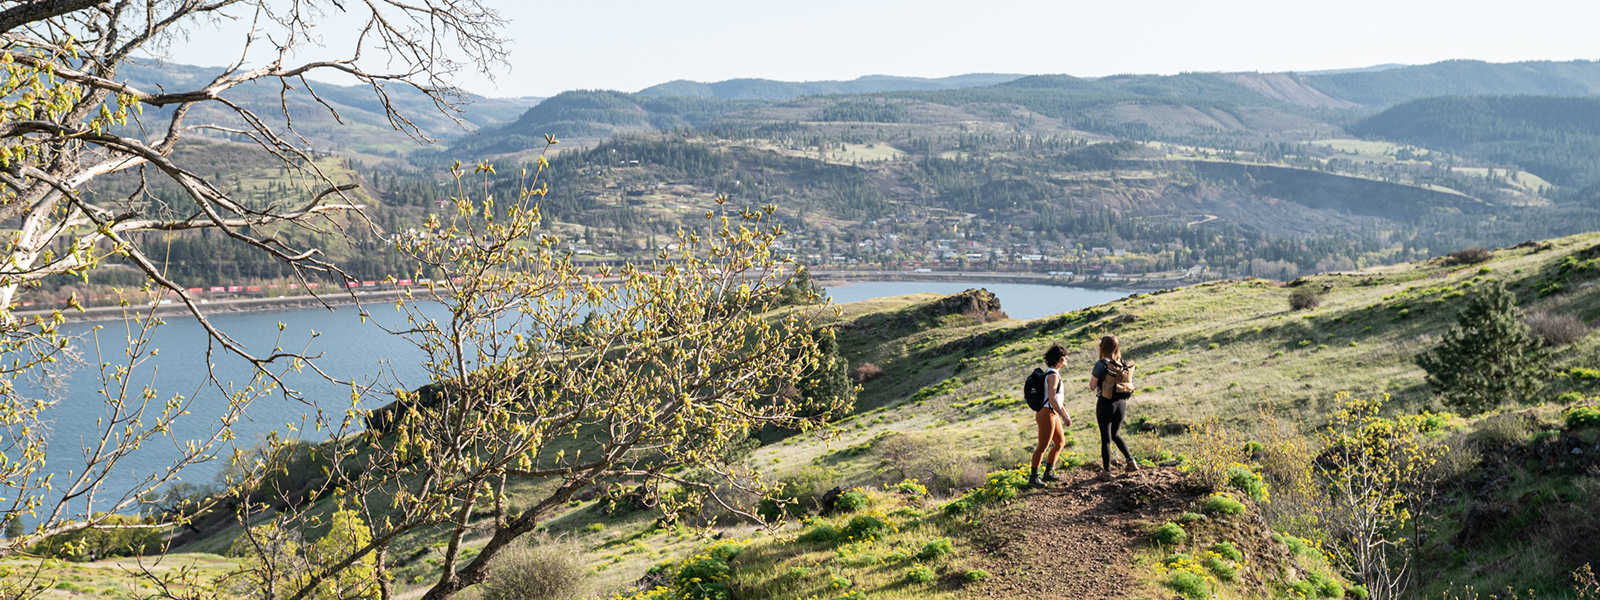 hikers on a trail in the Columbia River Gorge with backpacks